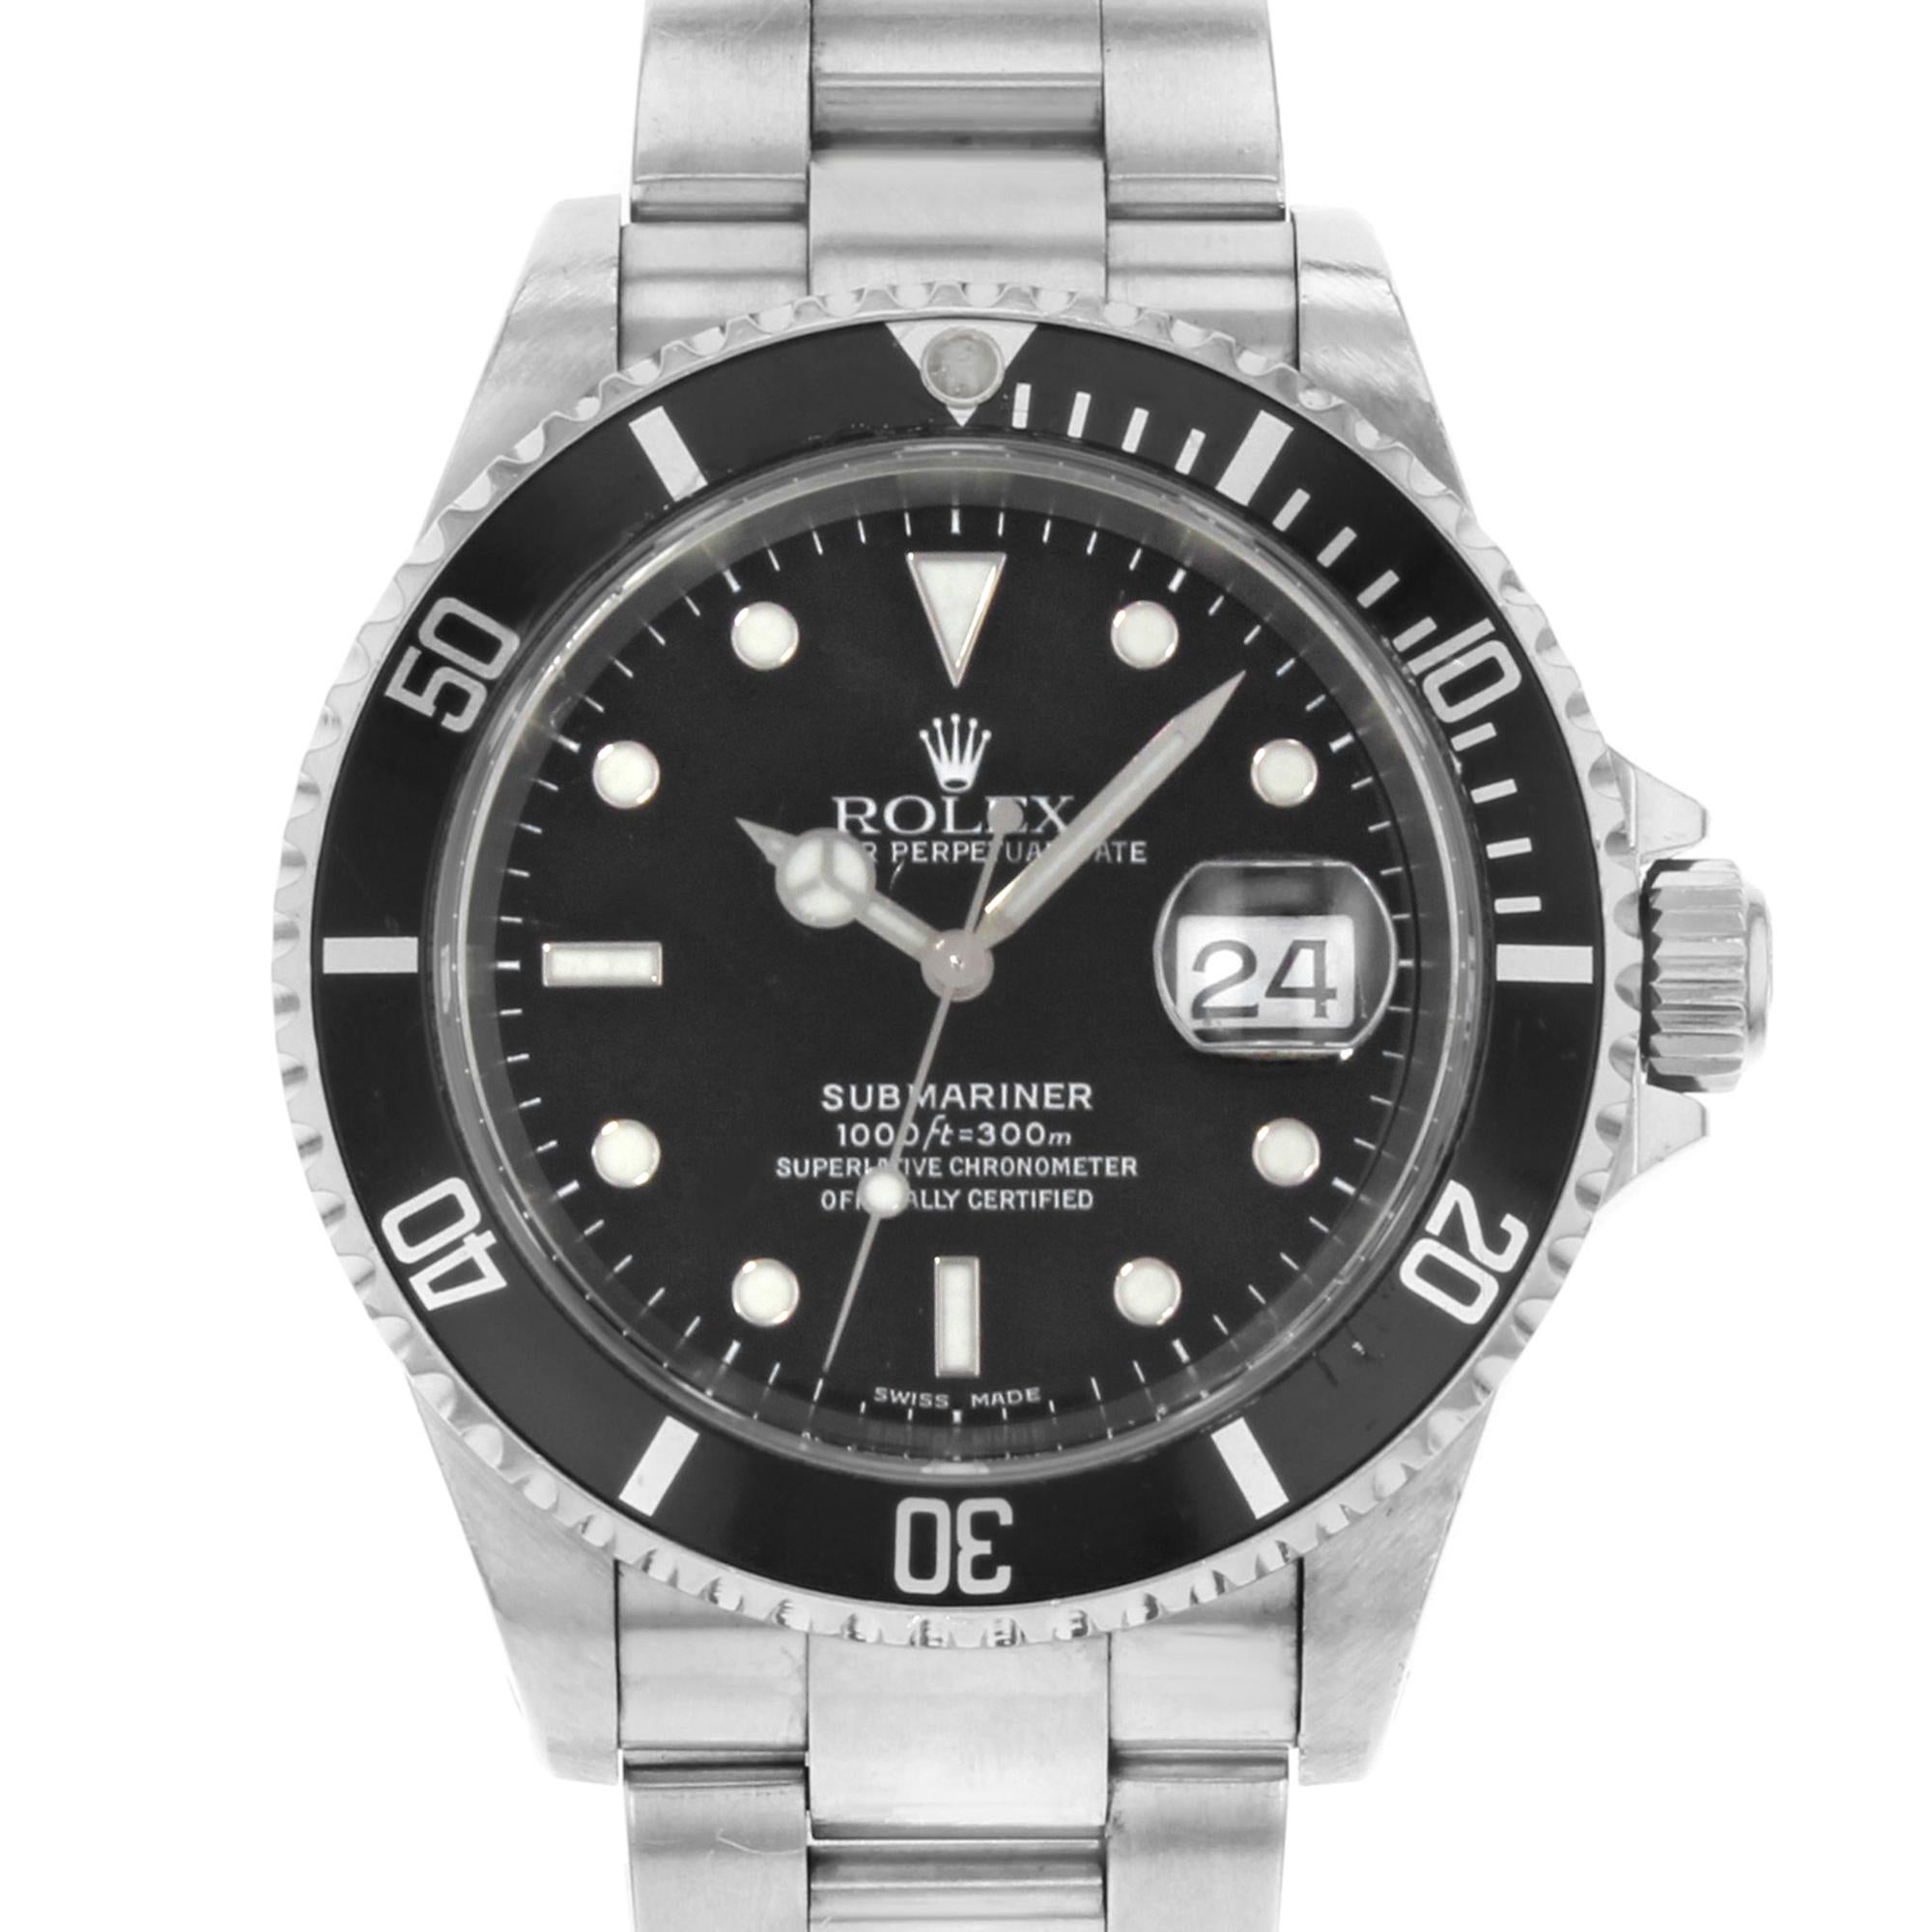 Rolex Submariner 16610 Black Dial Holes 1999 4-Liner Date Automatic Mens Watch